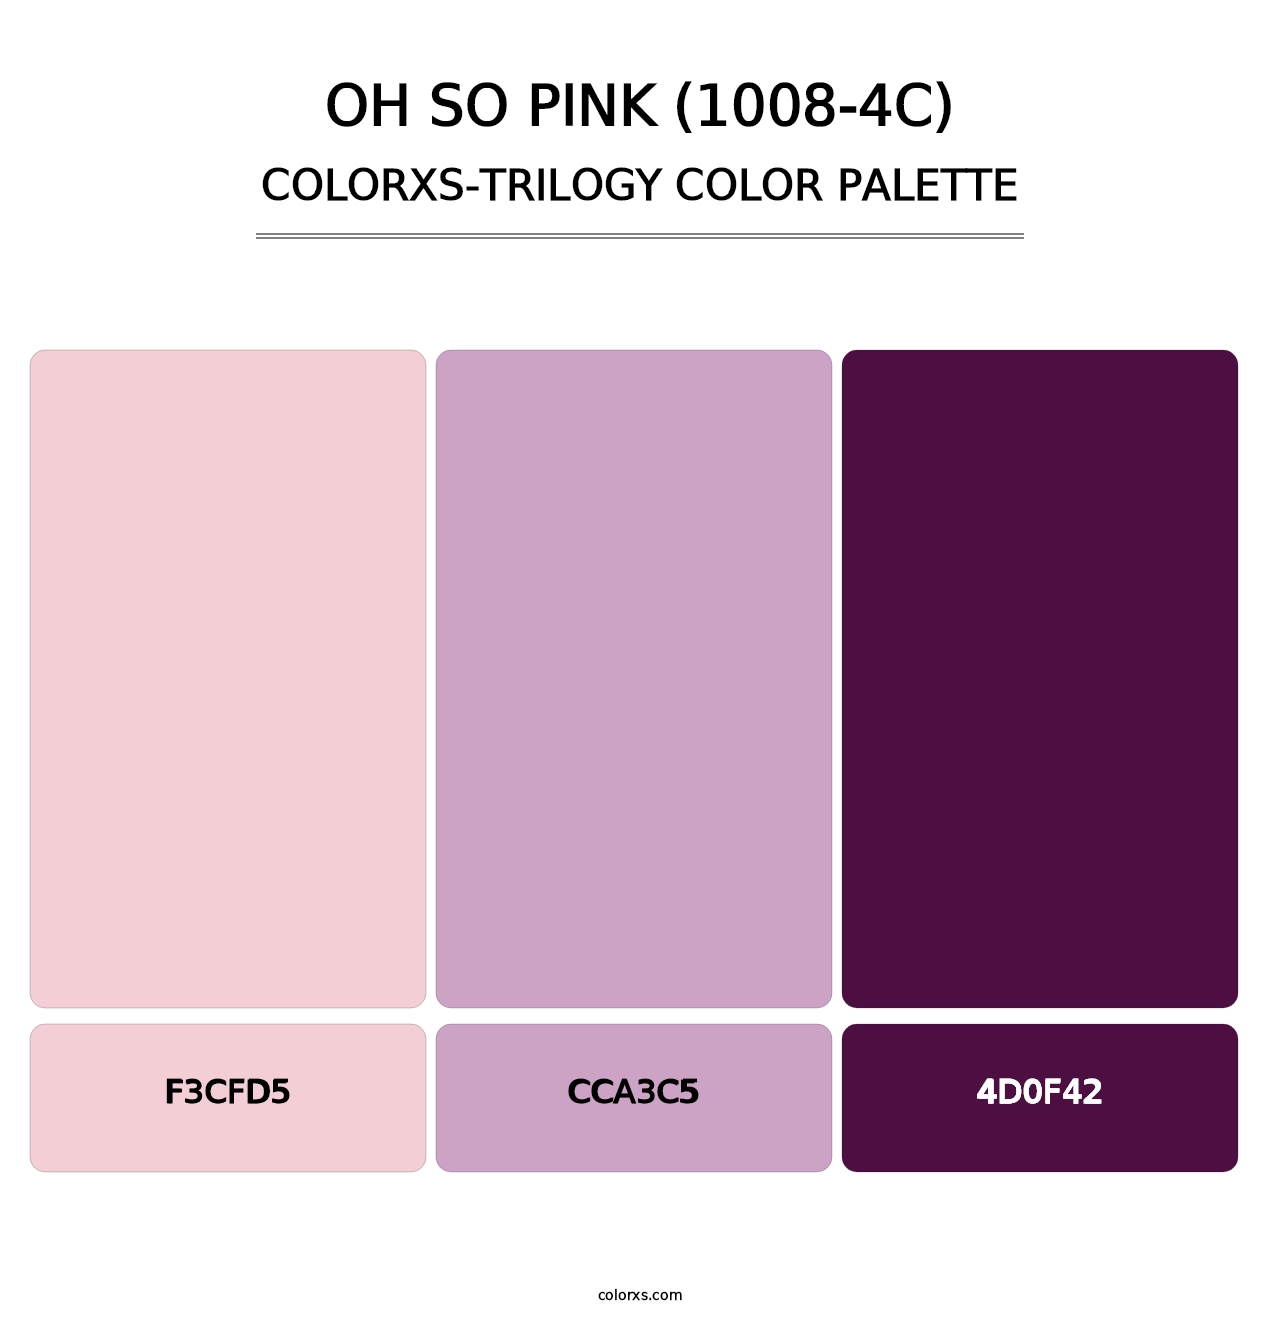 Oh So Pink (1008-4C) - Colorxs Trilogy Palette